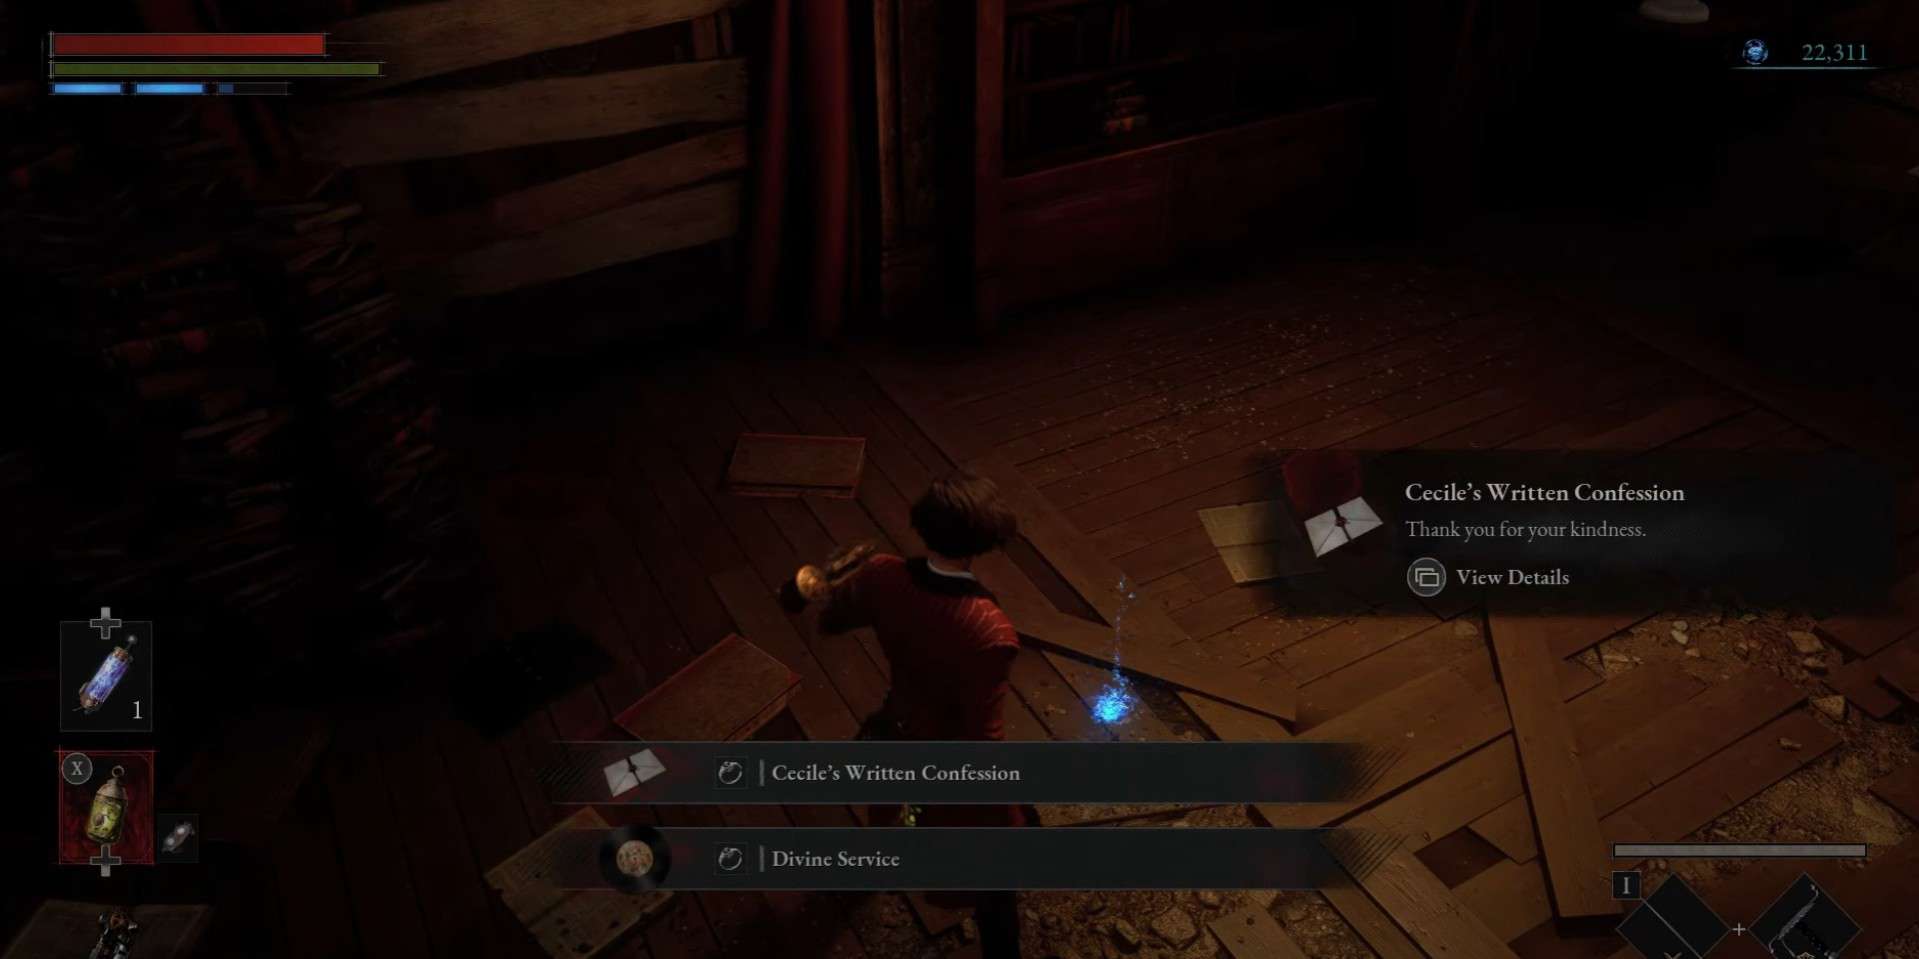 How To Get The Pray Gesture In Lies of P